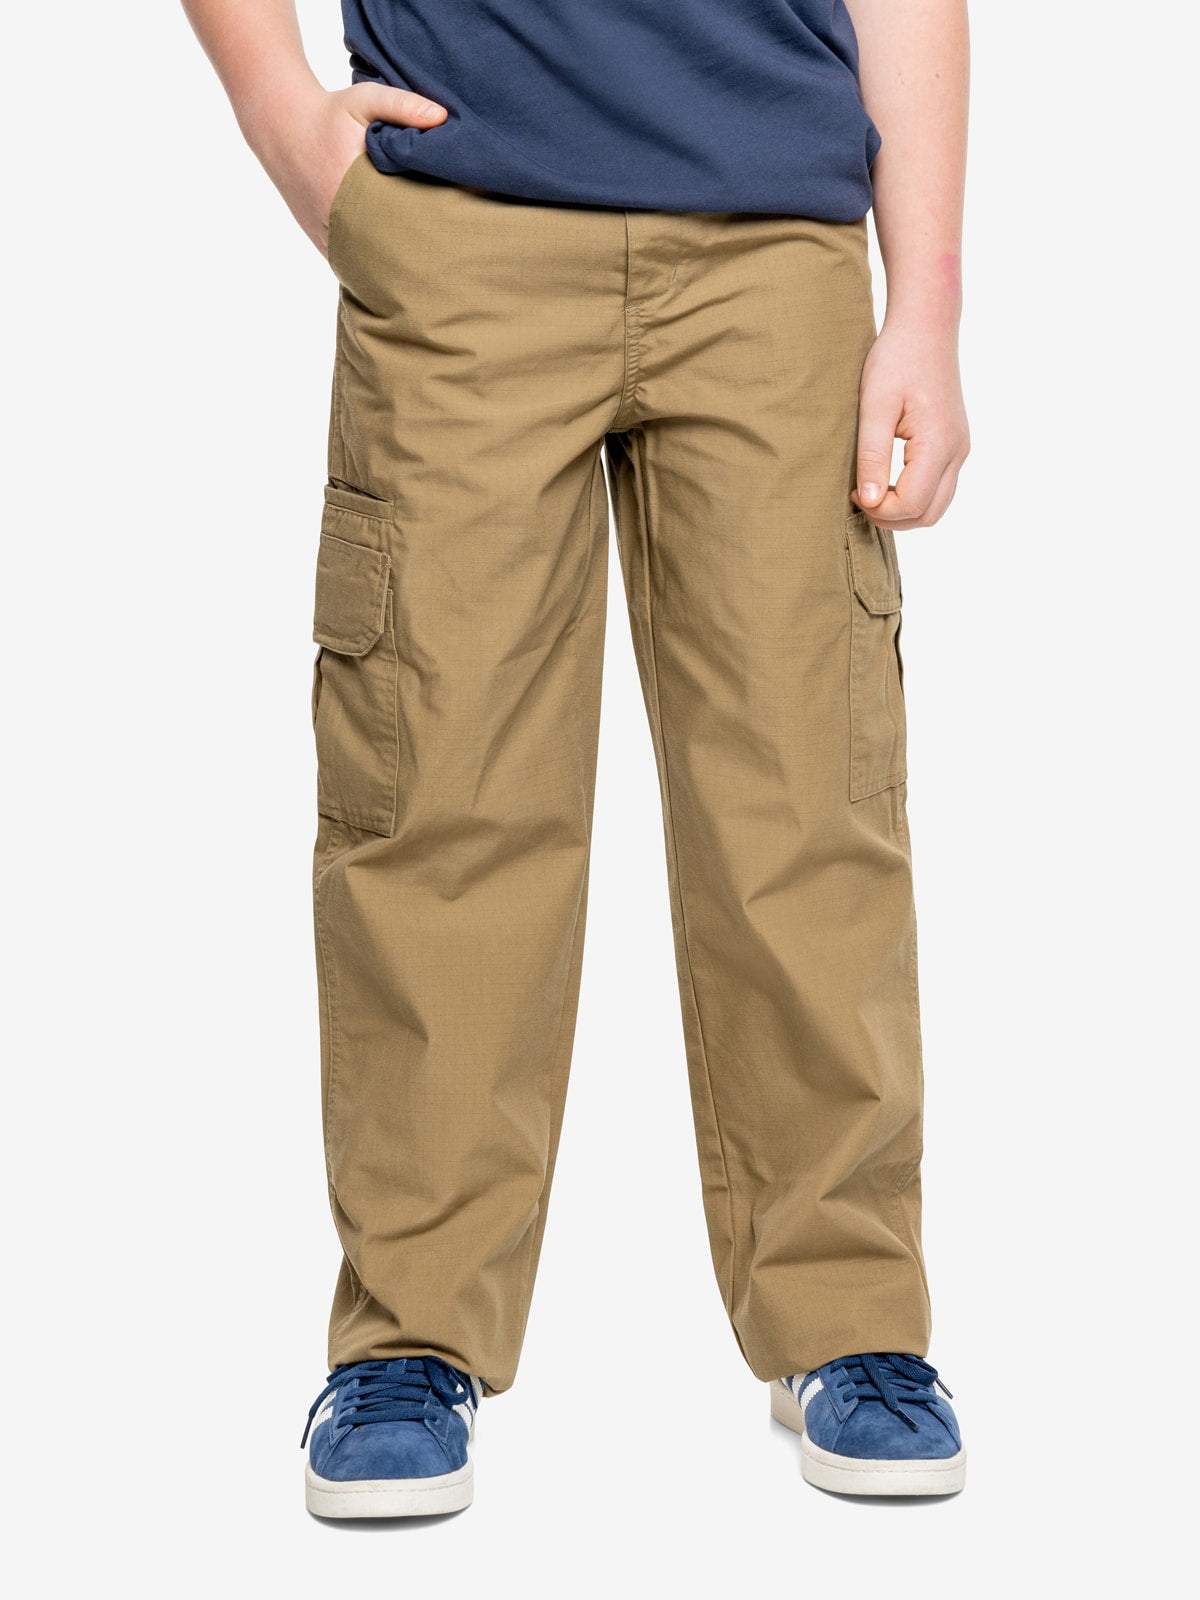 Nylon Rip Stop Pant Ideal for Warm-Ups